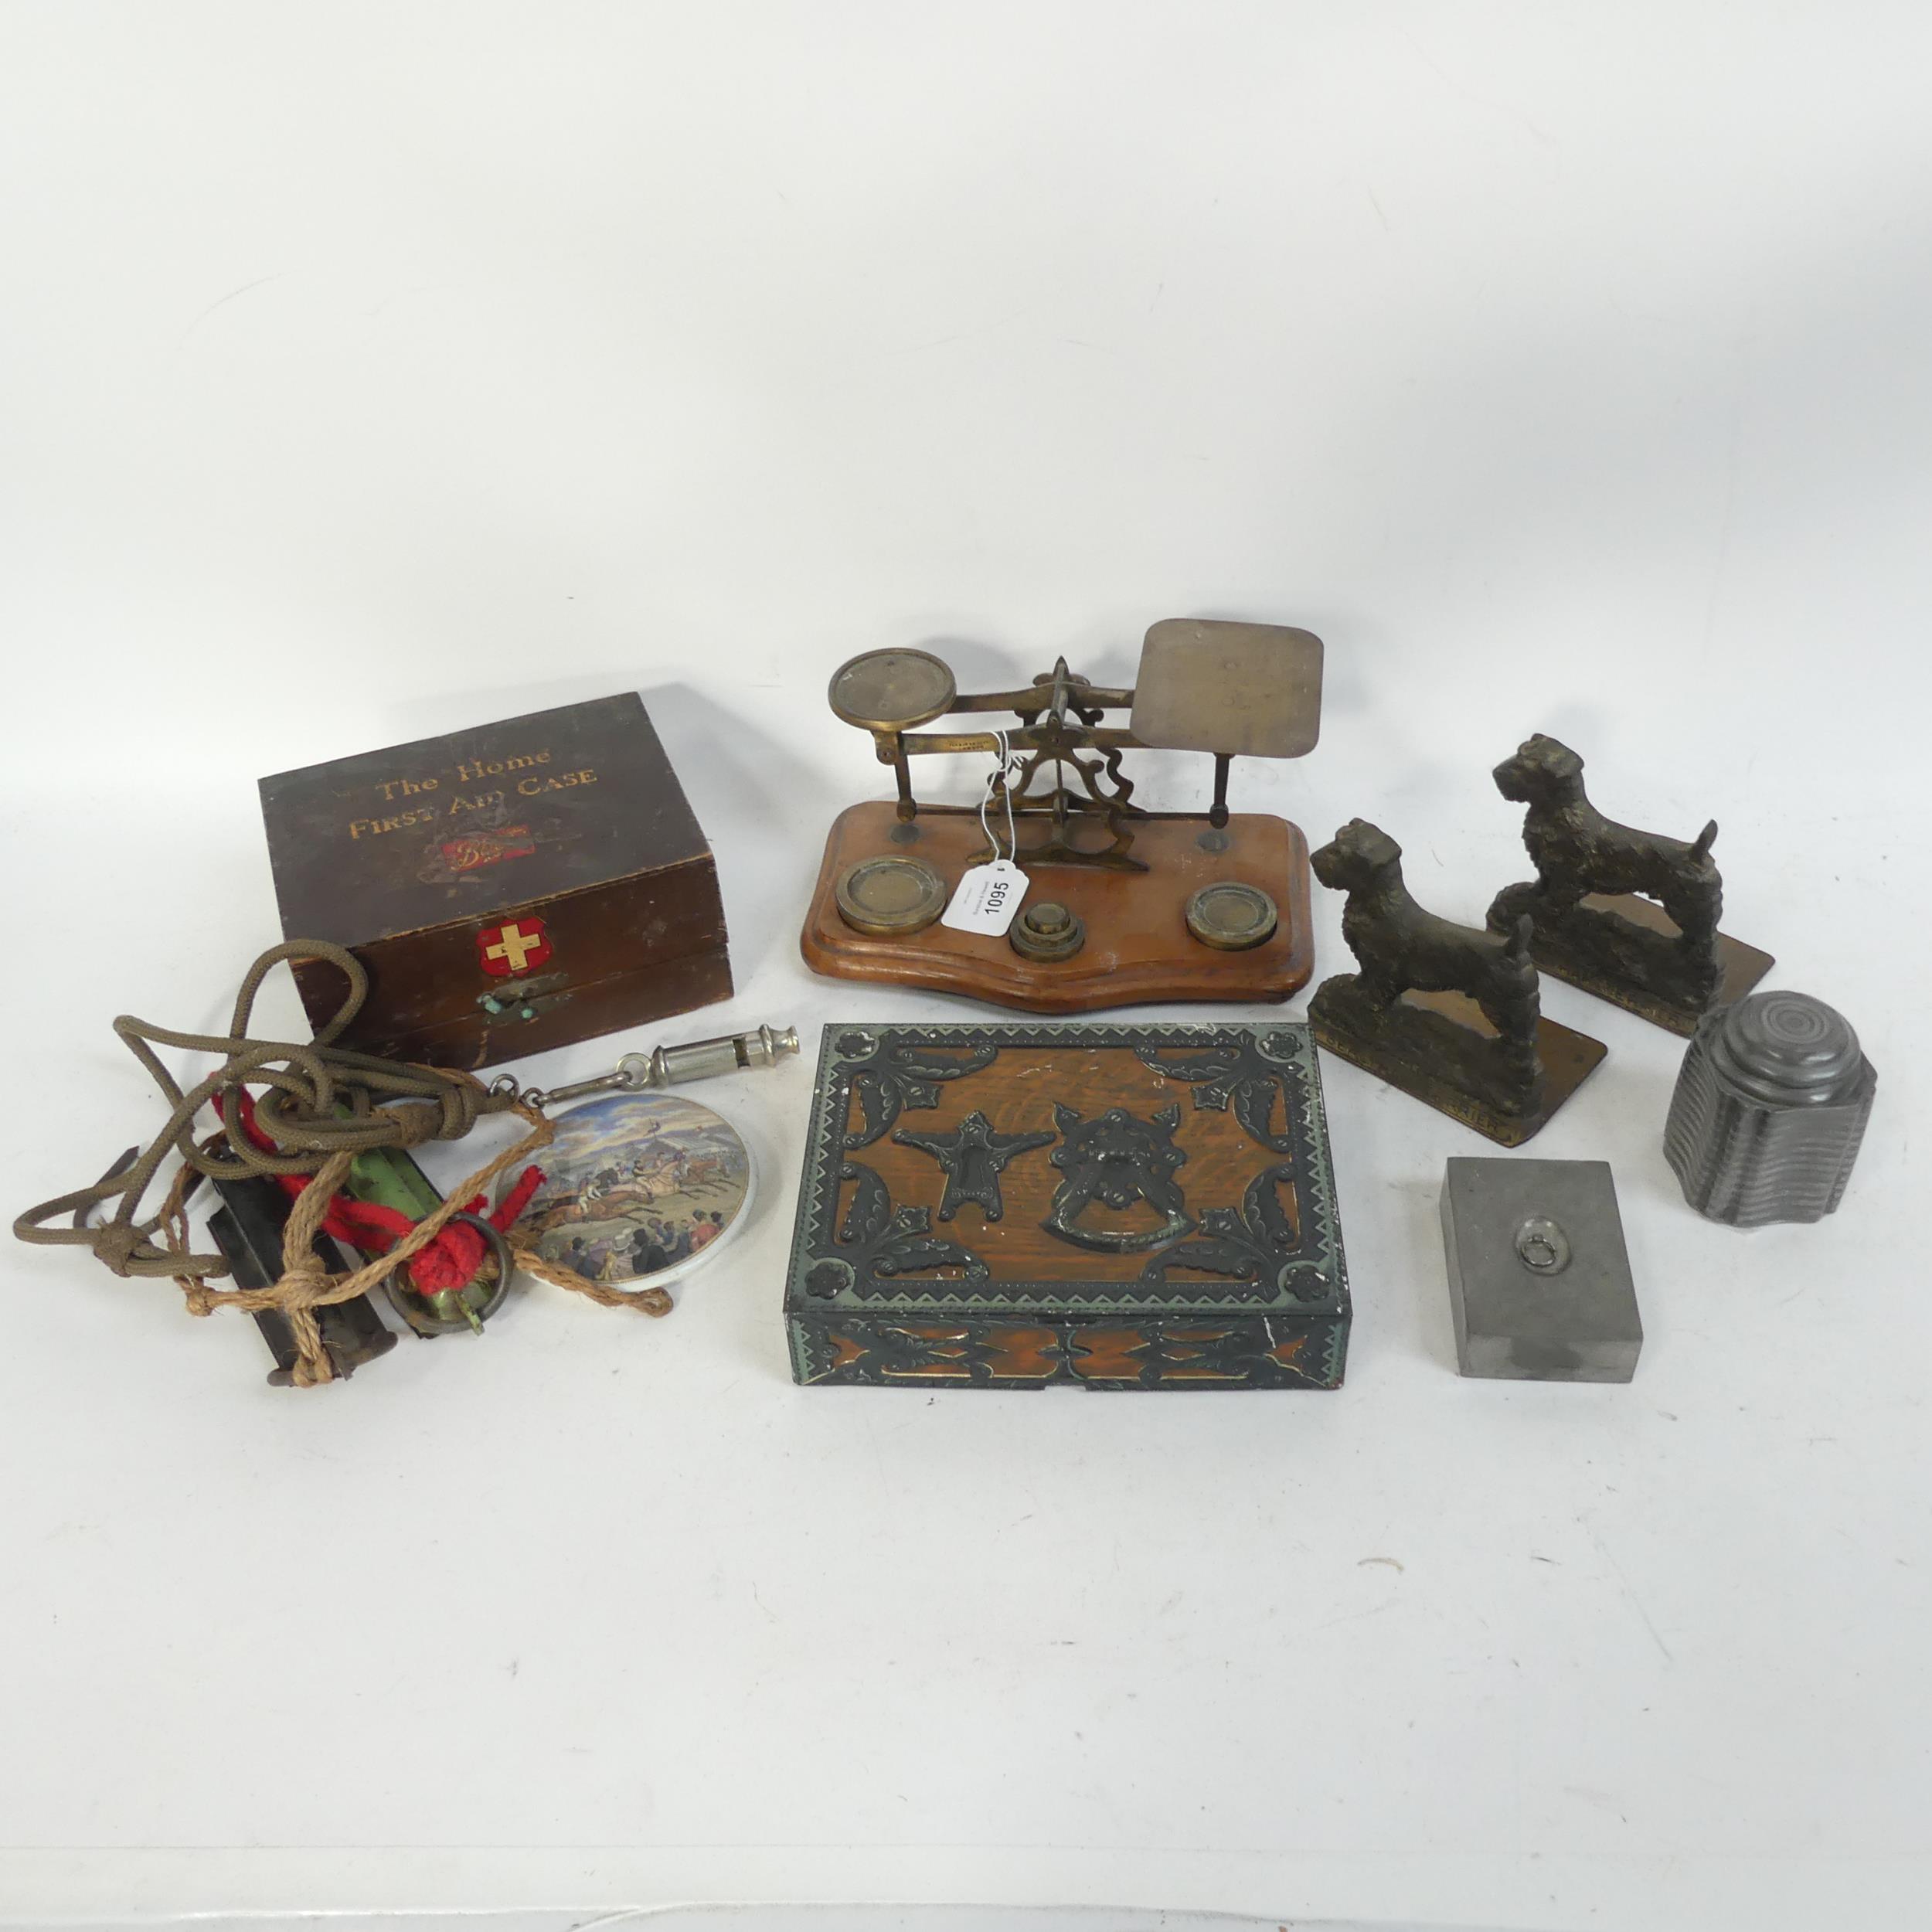 2 Salter's spring scales, a whistle, a pair of brass Terrier bookends, biscuit tin, pot lid